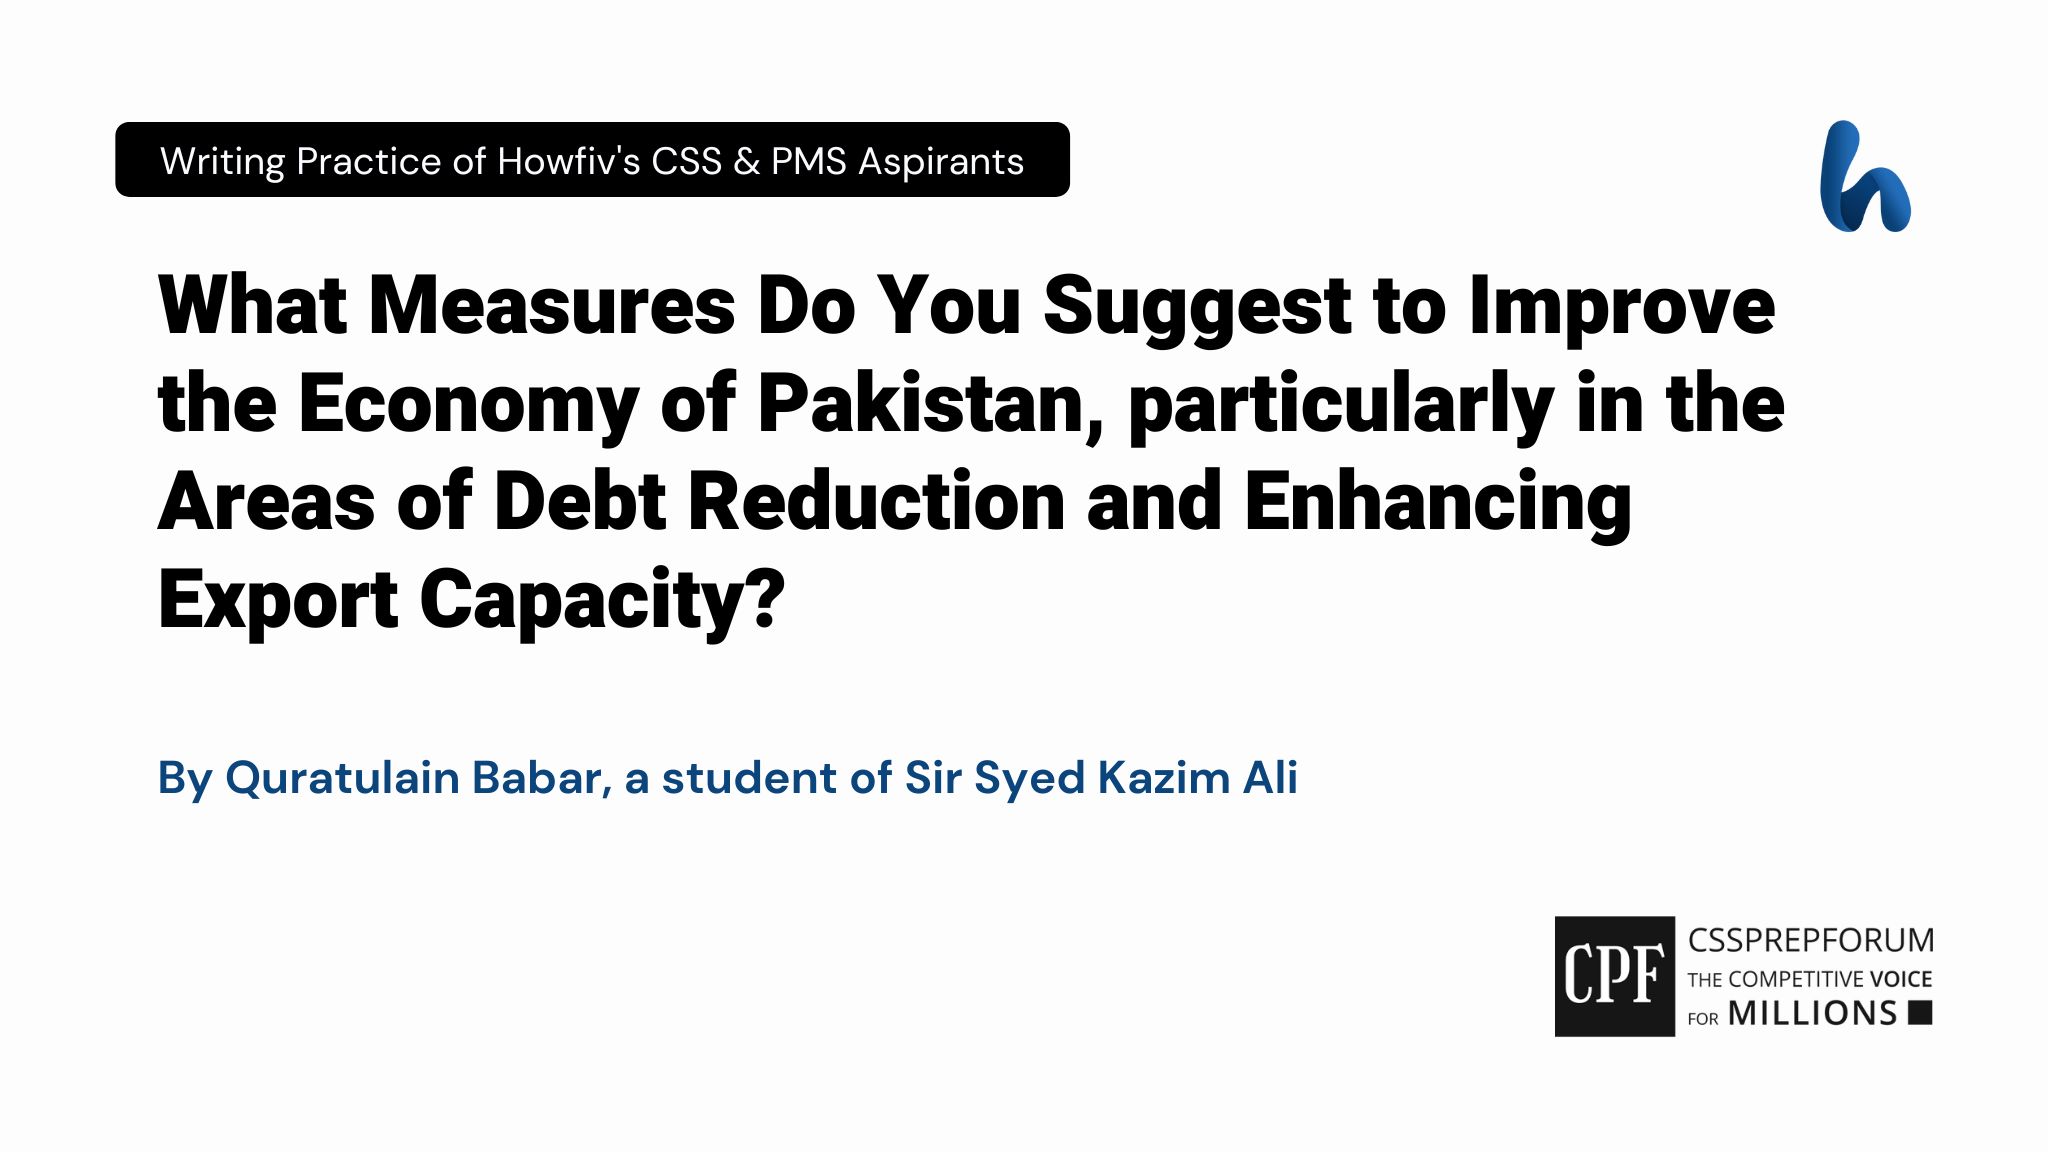 What Measures Do You Suggest to Improve the Economy of Pakistan, particularly in the Areas of Debt Reduction and Enhancing Export Capacity